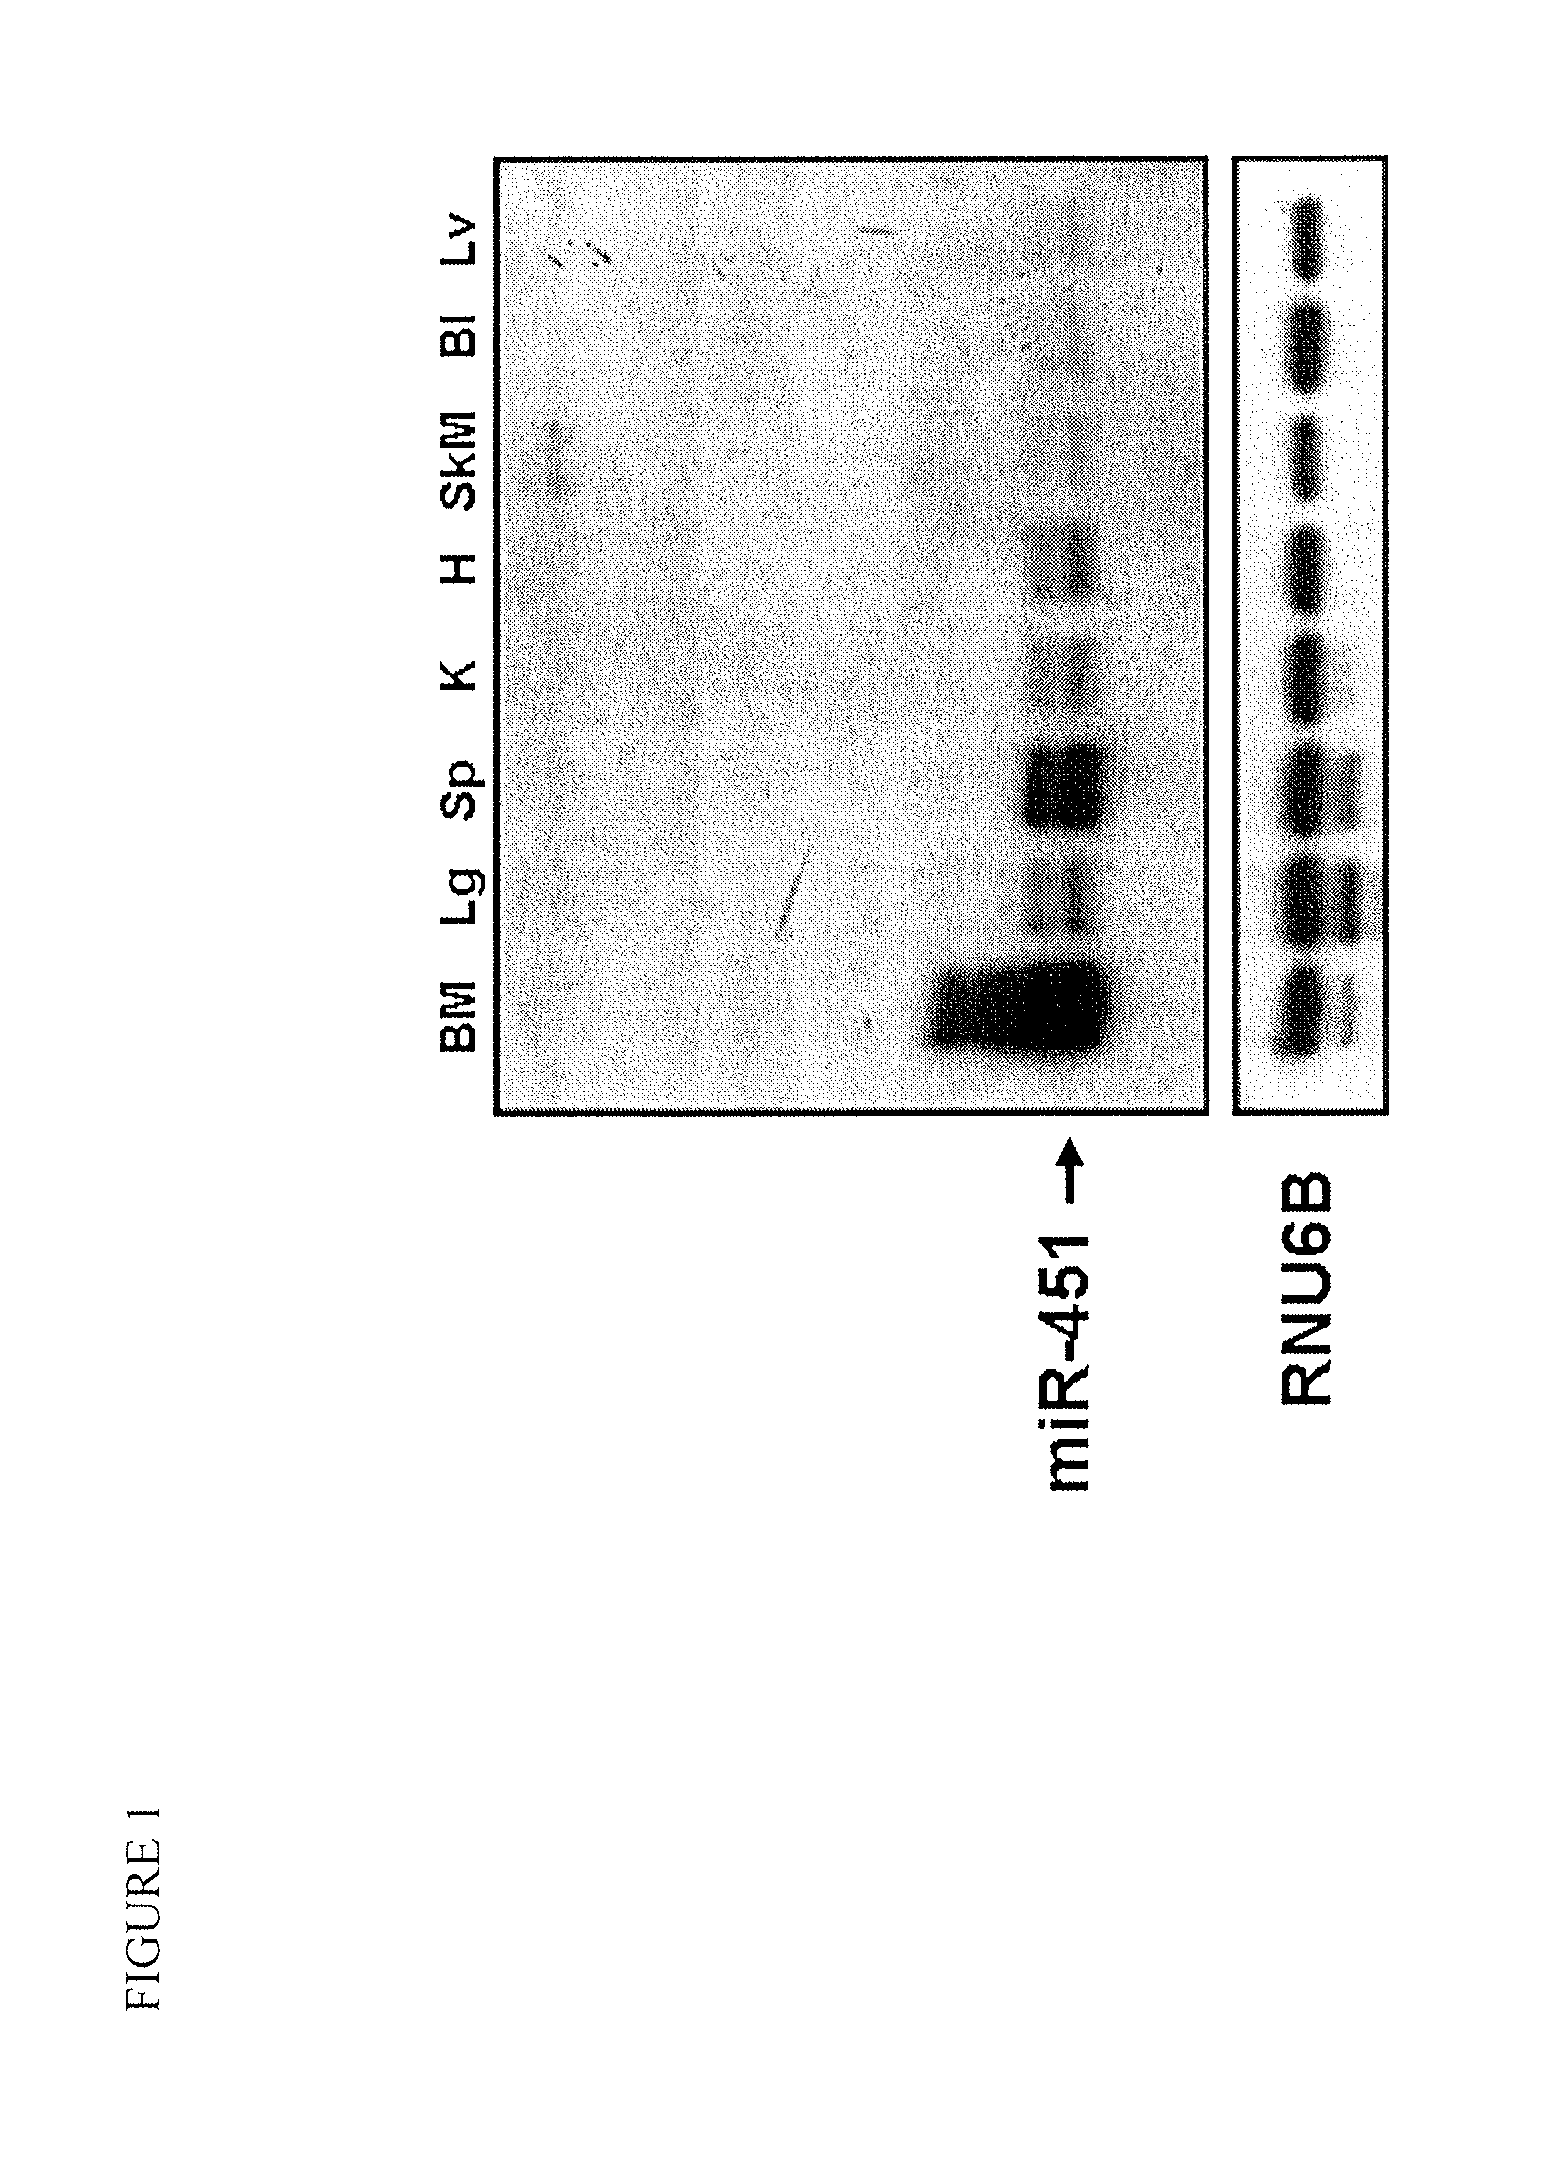 Antimir-451 for the treatment of polycythemias